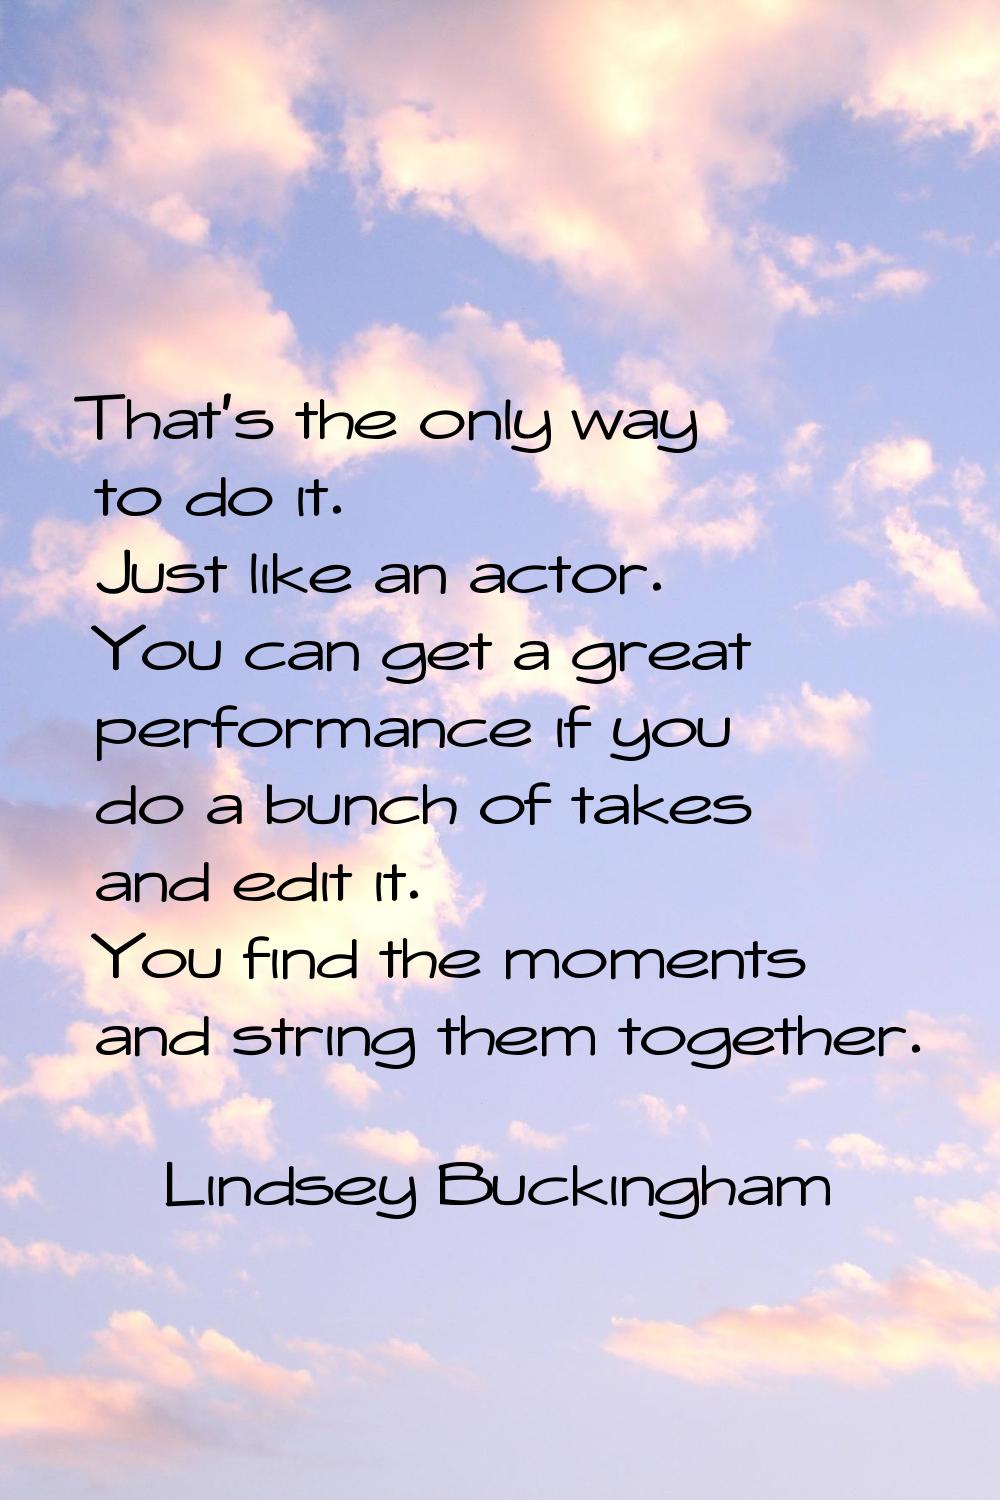 That's the only way to do it. Just like an actor. You can get a great performance if you do a bunch